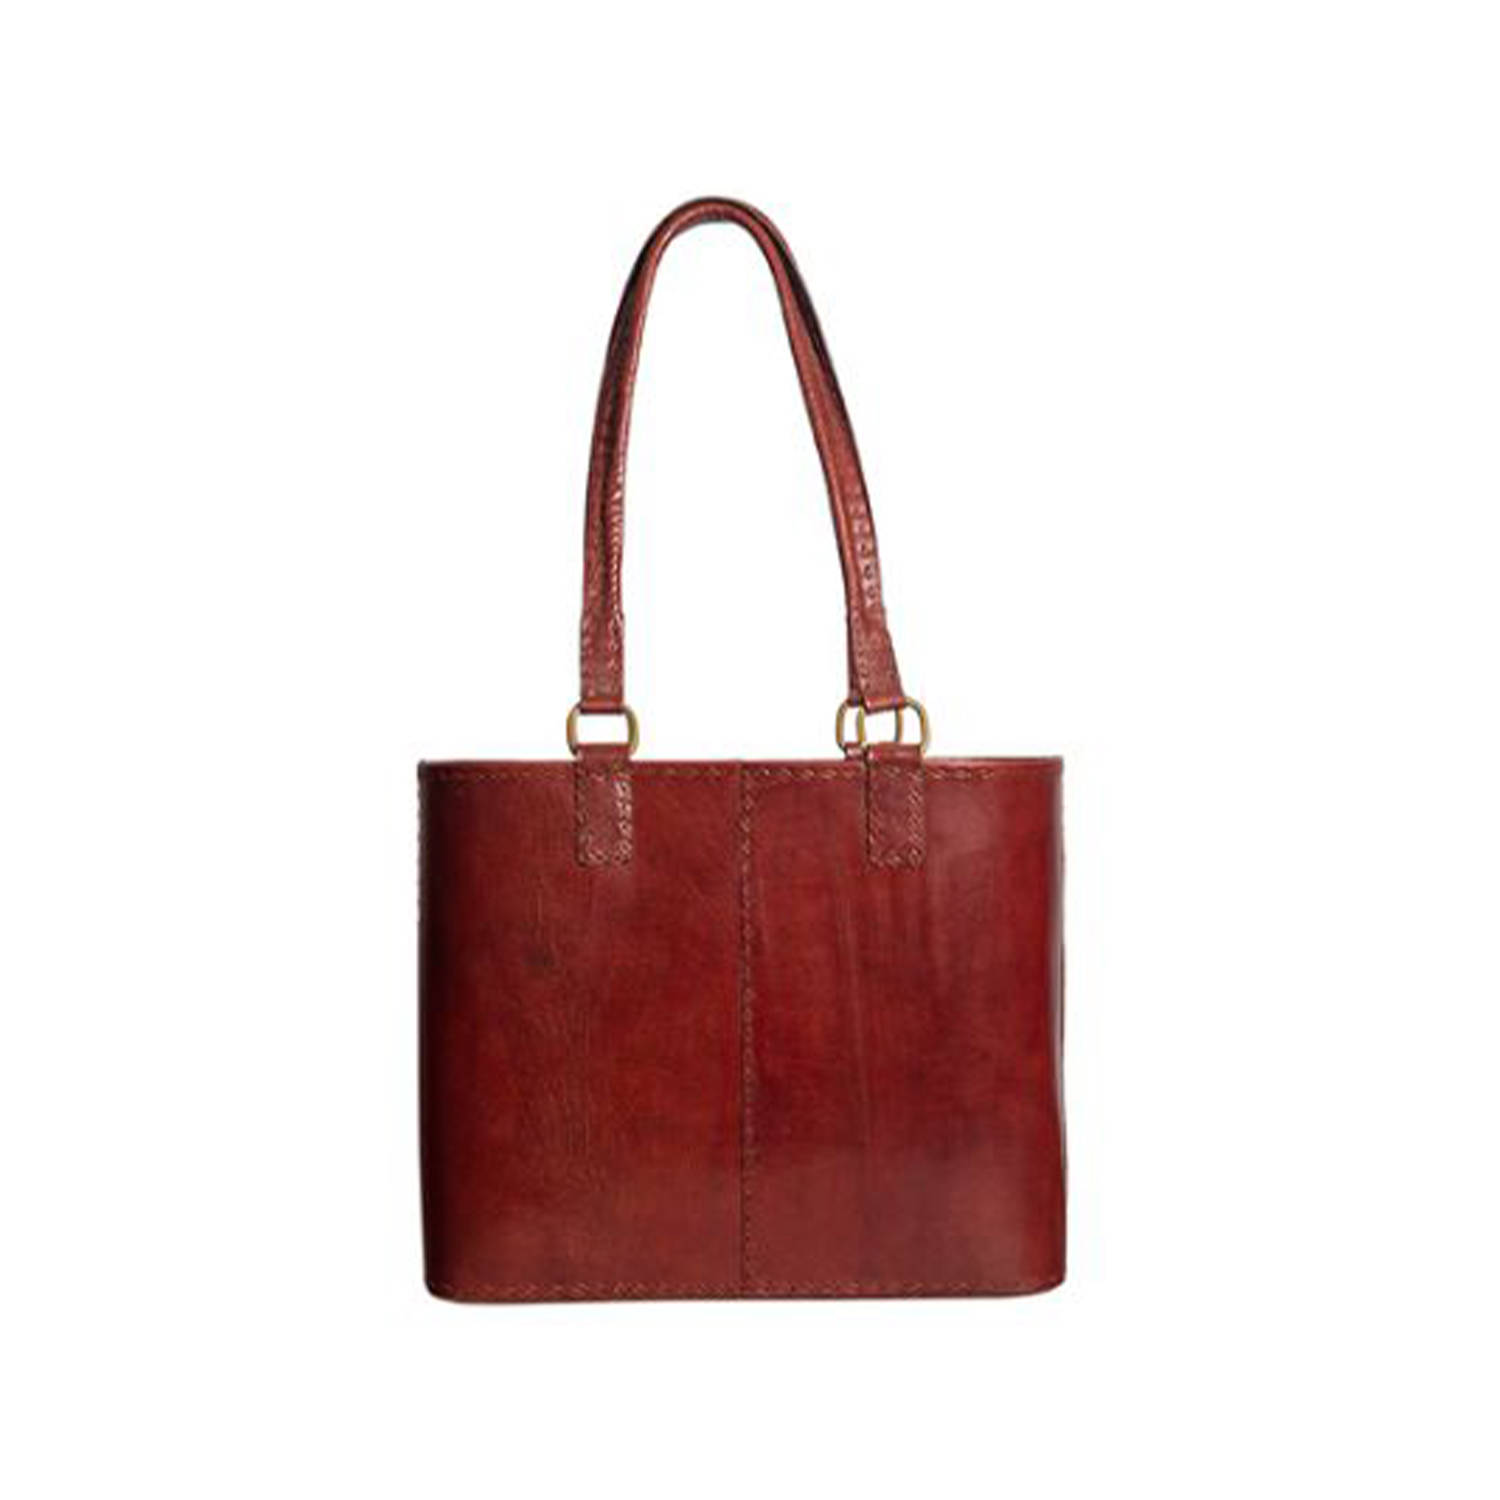 Buy SS Leather Pure Leather Handbag (Brown) Online at Low prices in India  on Winsant, India fastest… | Women handbags, Soft leather handbags, Leather  handbags women